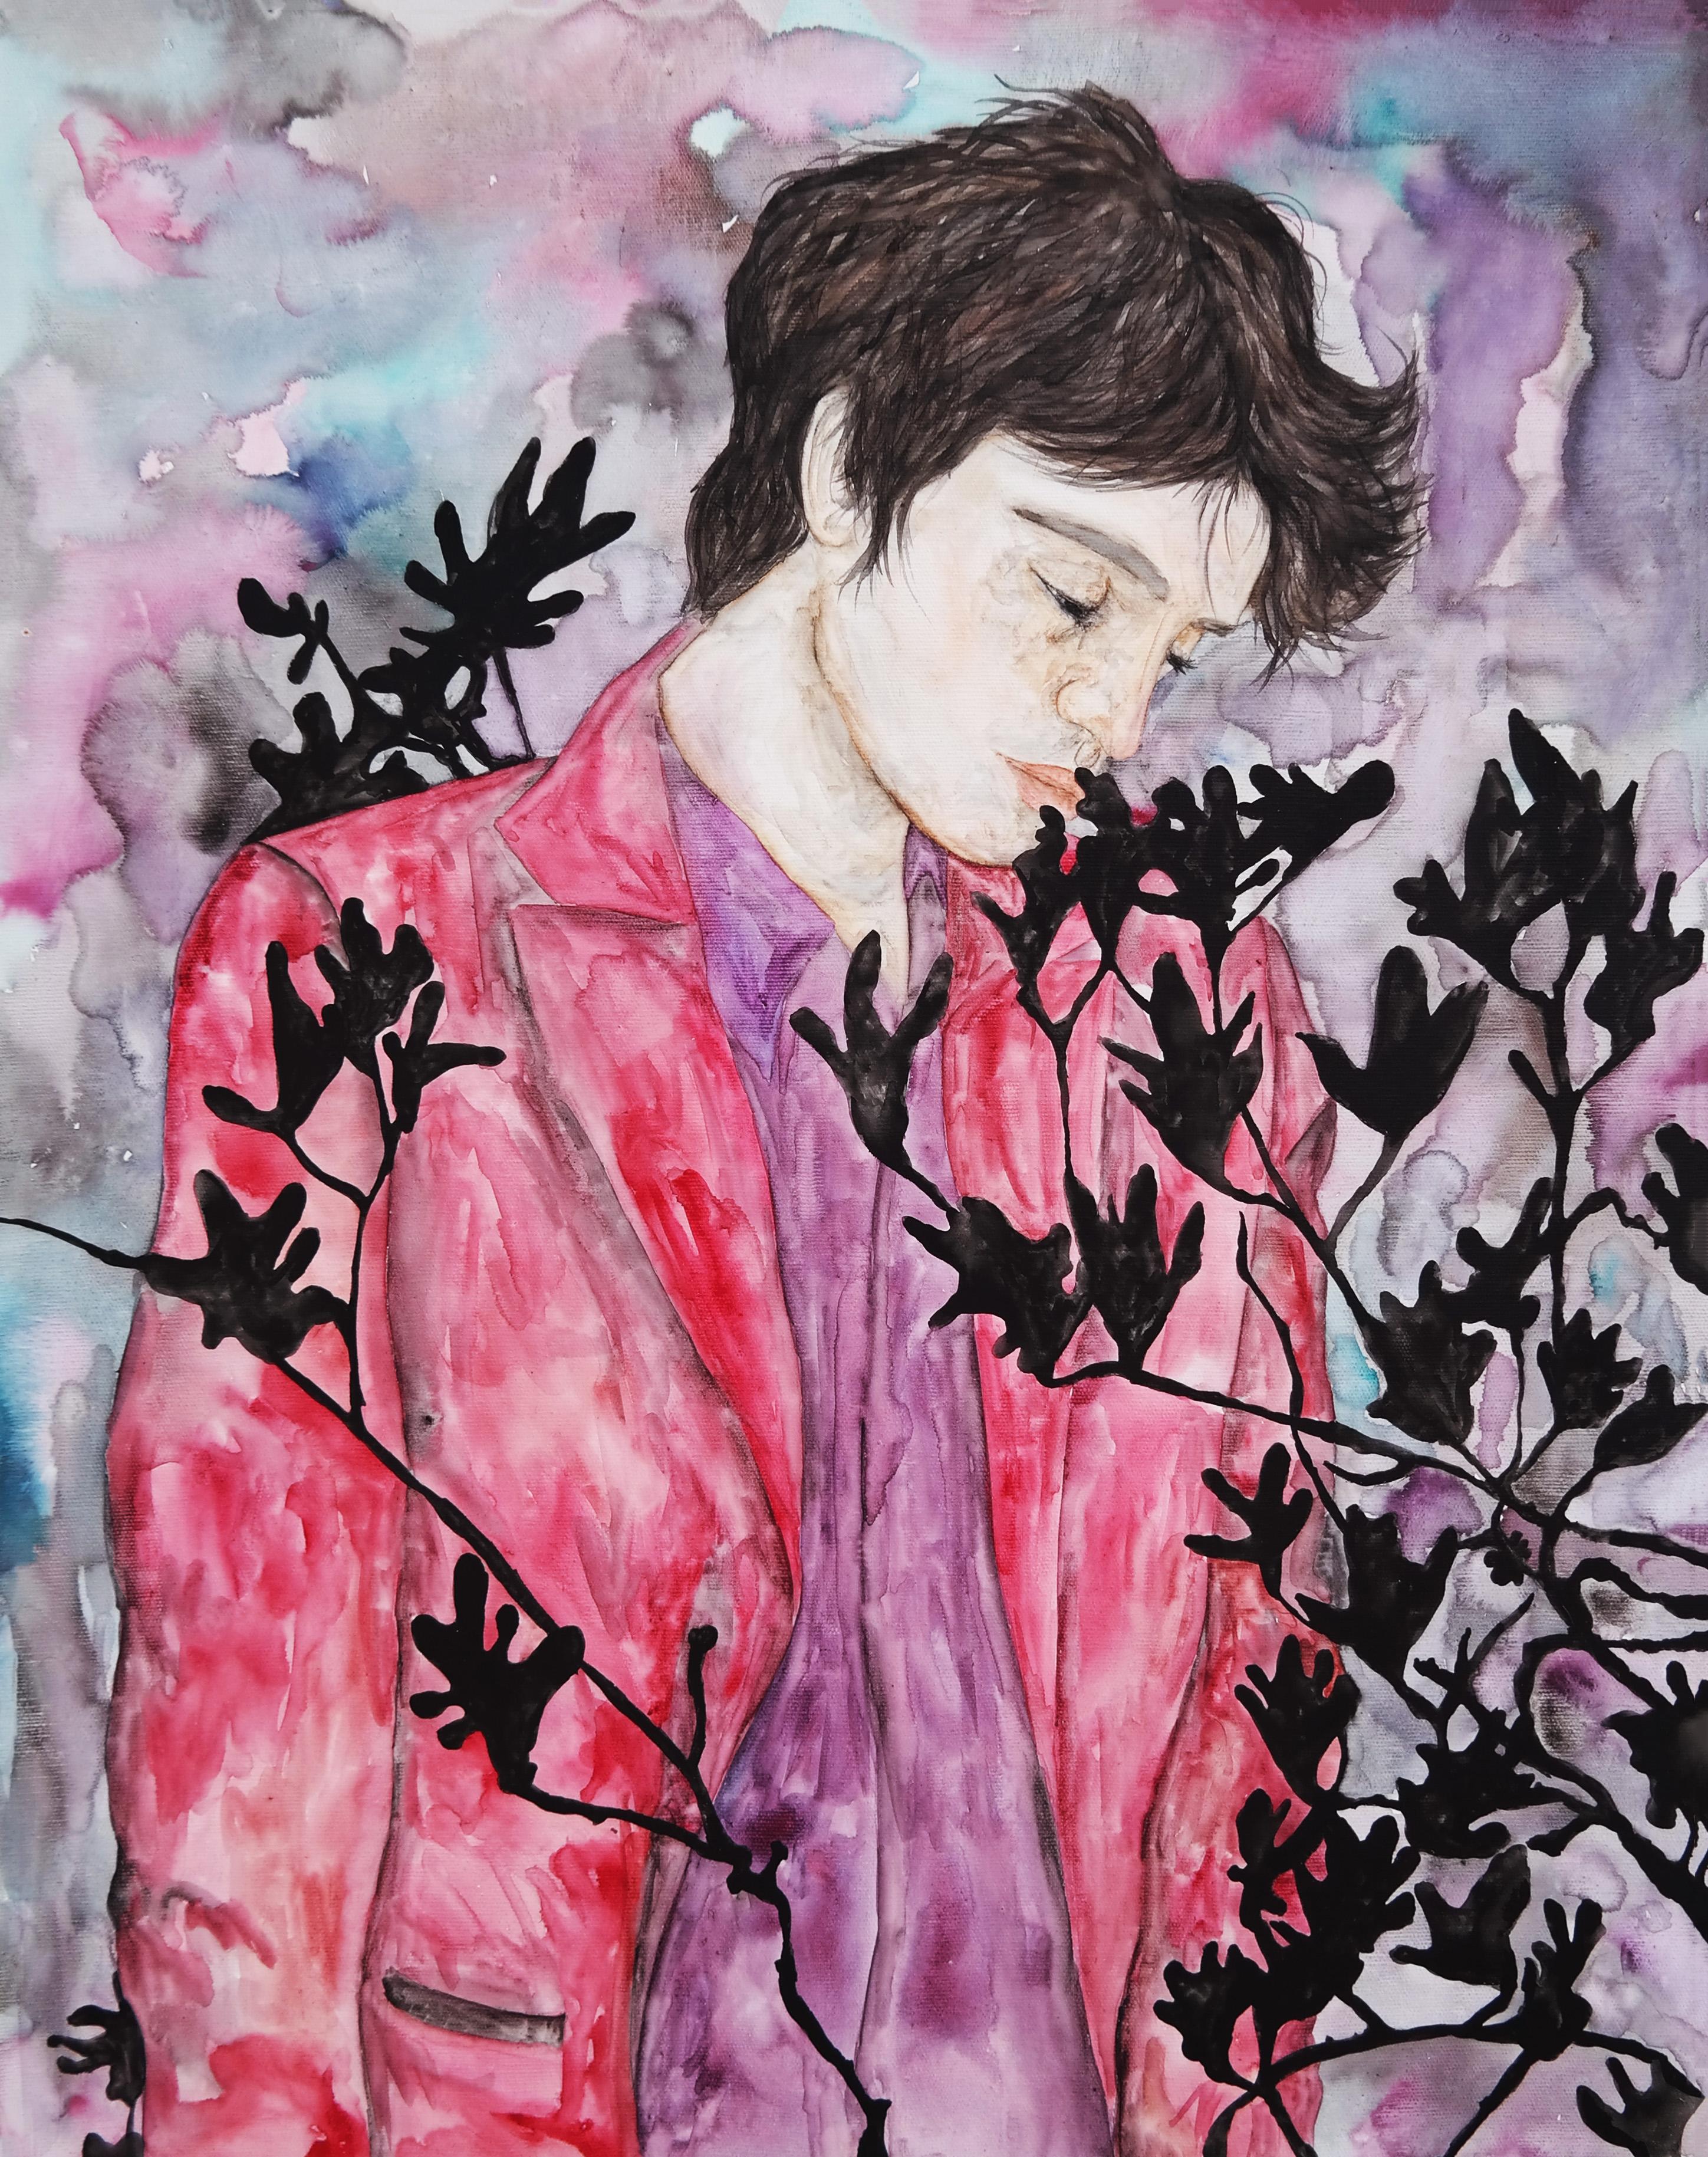 A dandy in the garden of black roses. Portrait Painting